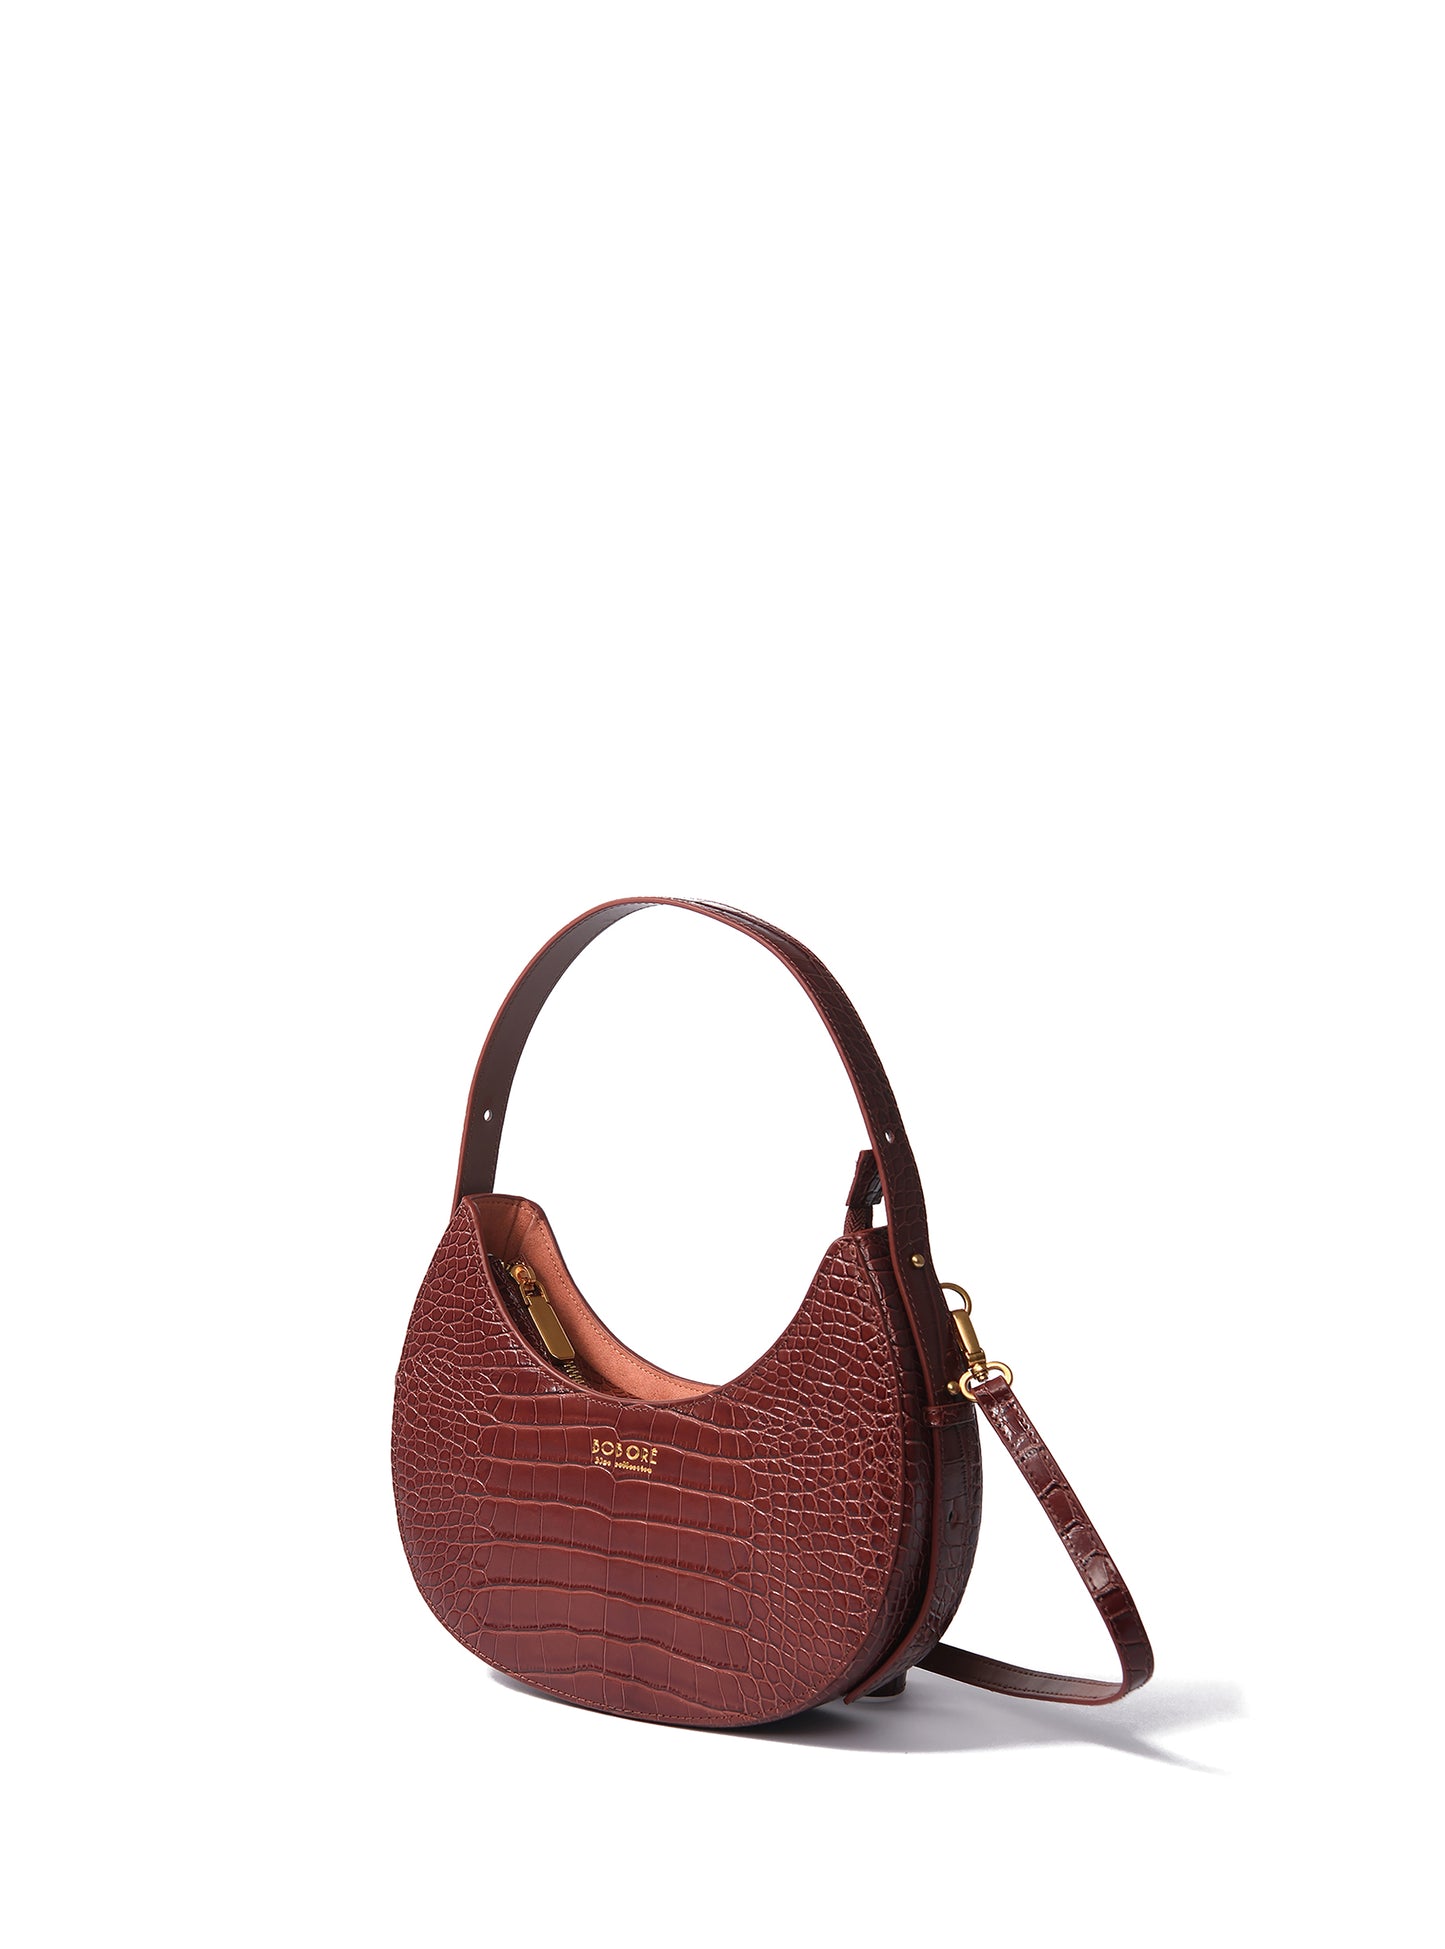 Naomi Leather Moon Bag with Croc-Embossed Pattern, Caramel